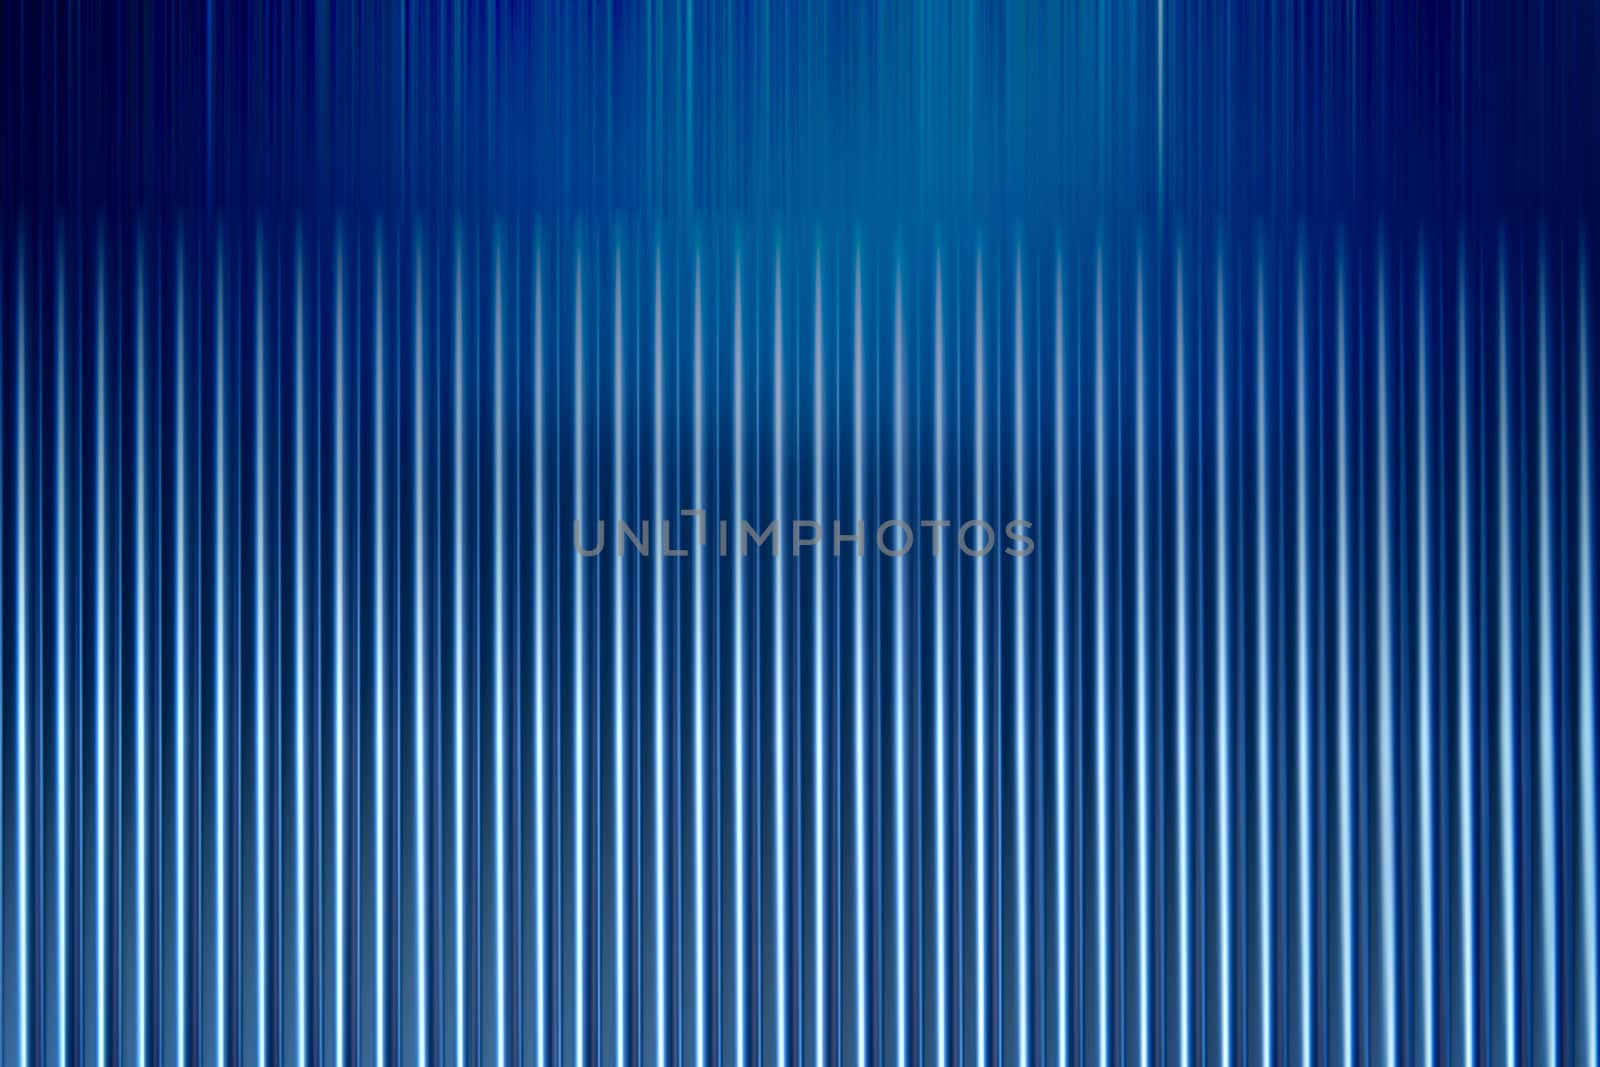 Background with a vertical stripes.